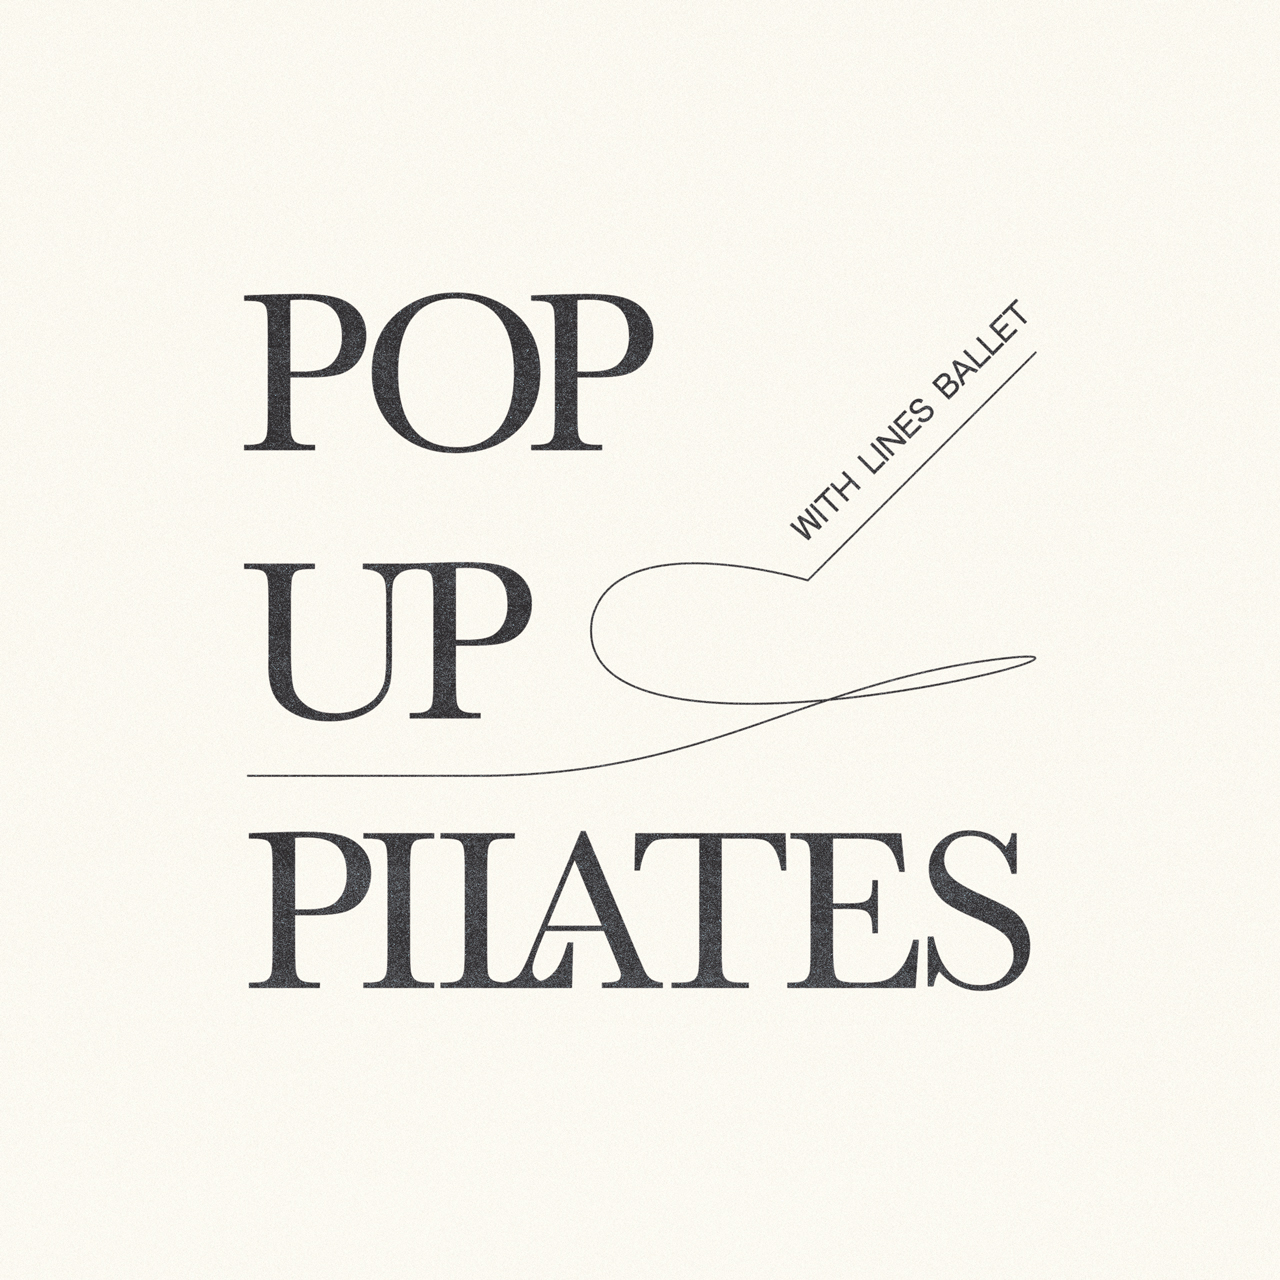 "Pop Up Pilates" is written with black ink on a blank surface.